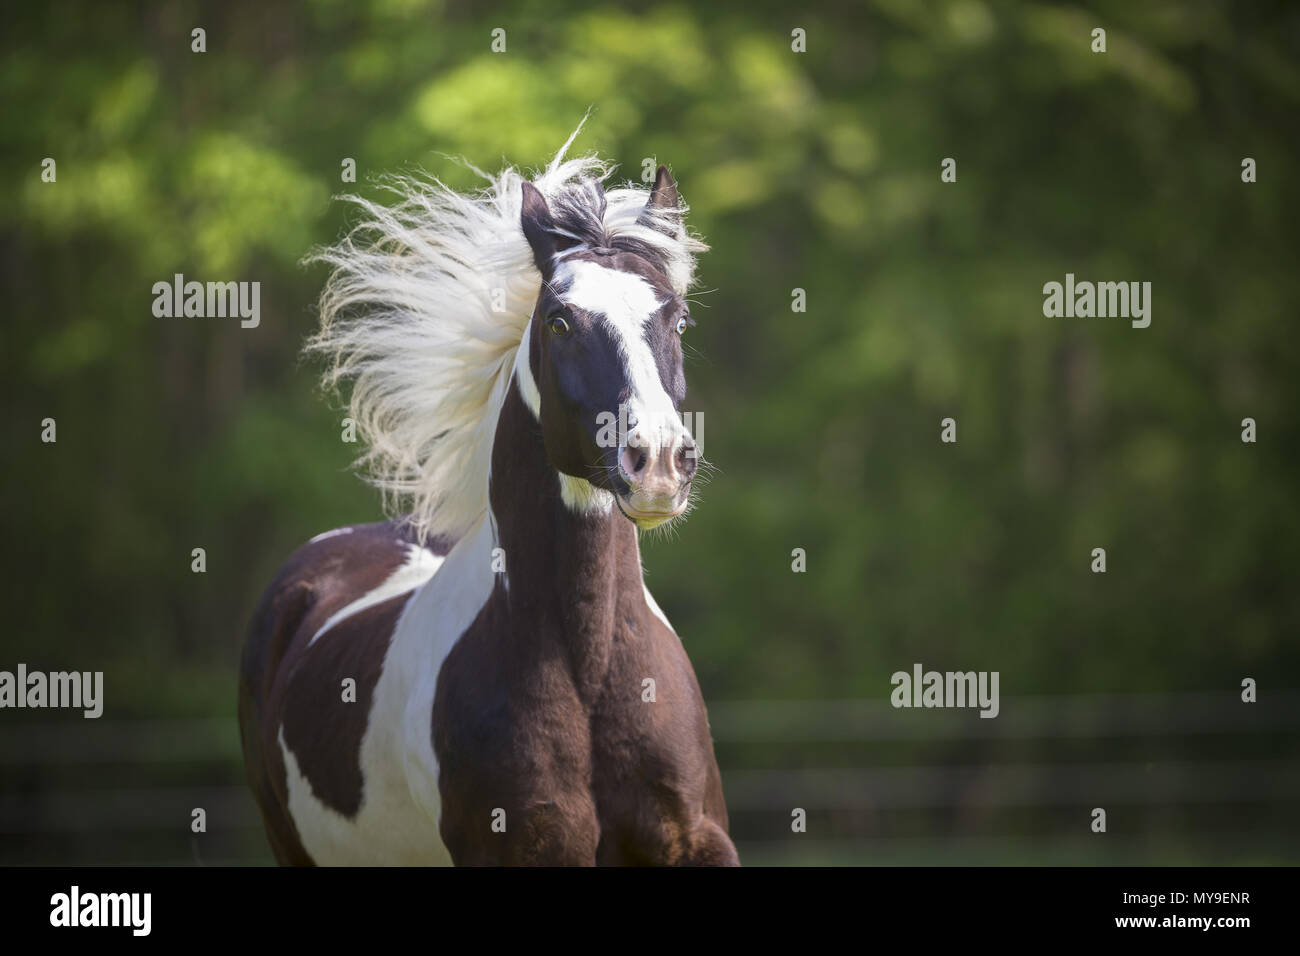 Pinto. Portrait of skewbald gelding with mane flowing. Germany Stock Photo